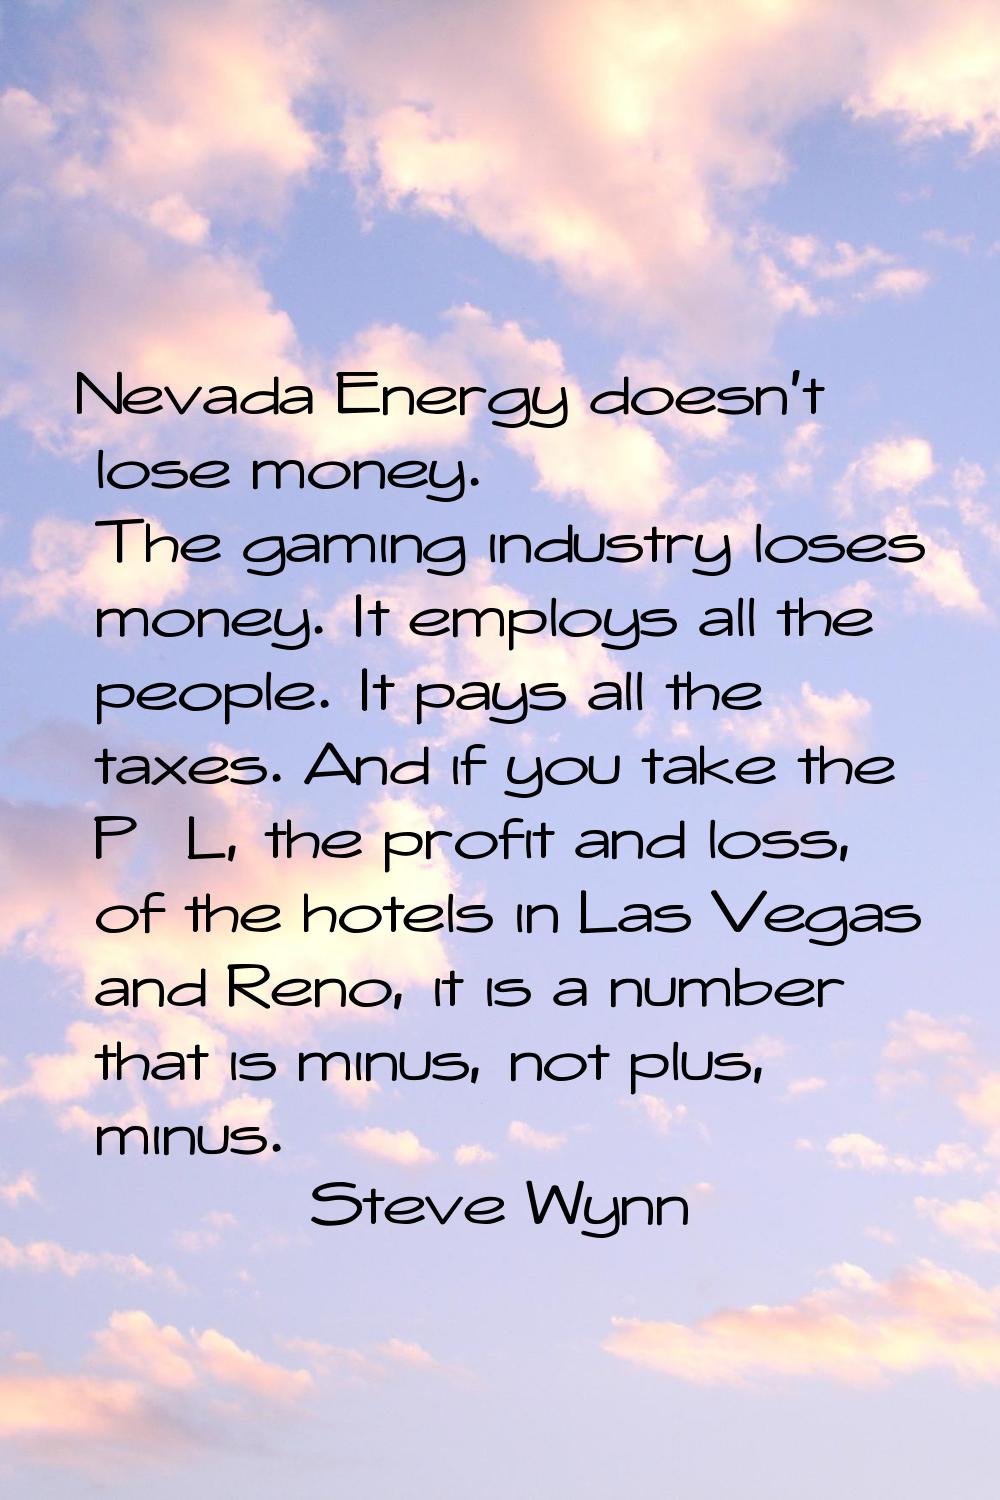 Nevada Energy doesn't lose money. The gaming industry loses money. It employs all the people. It pa